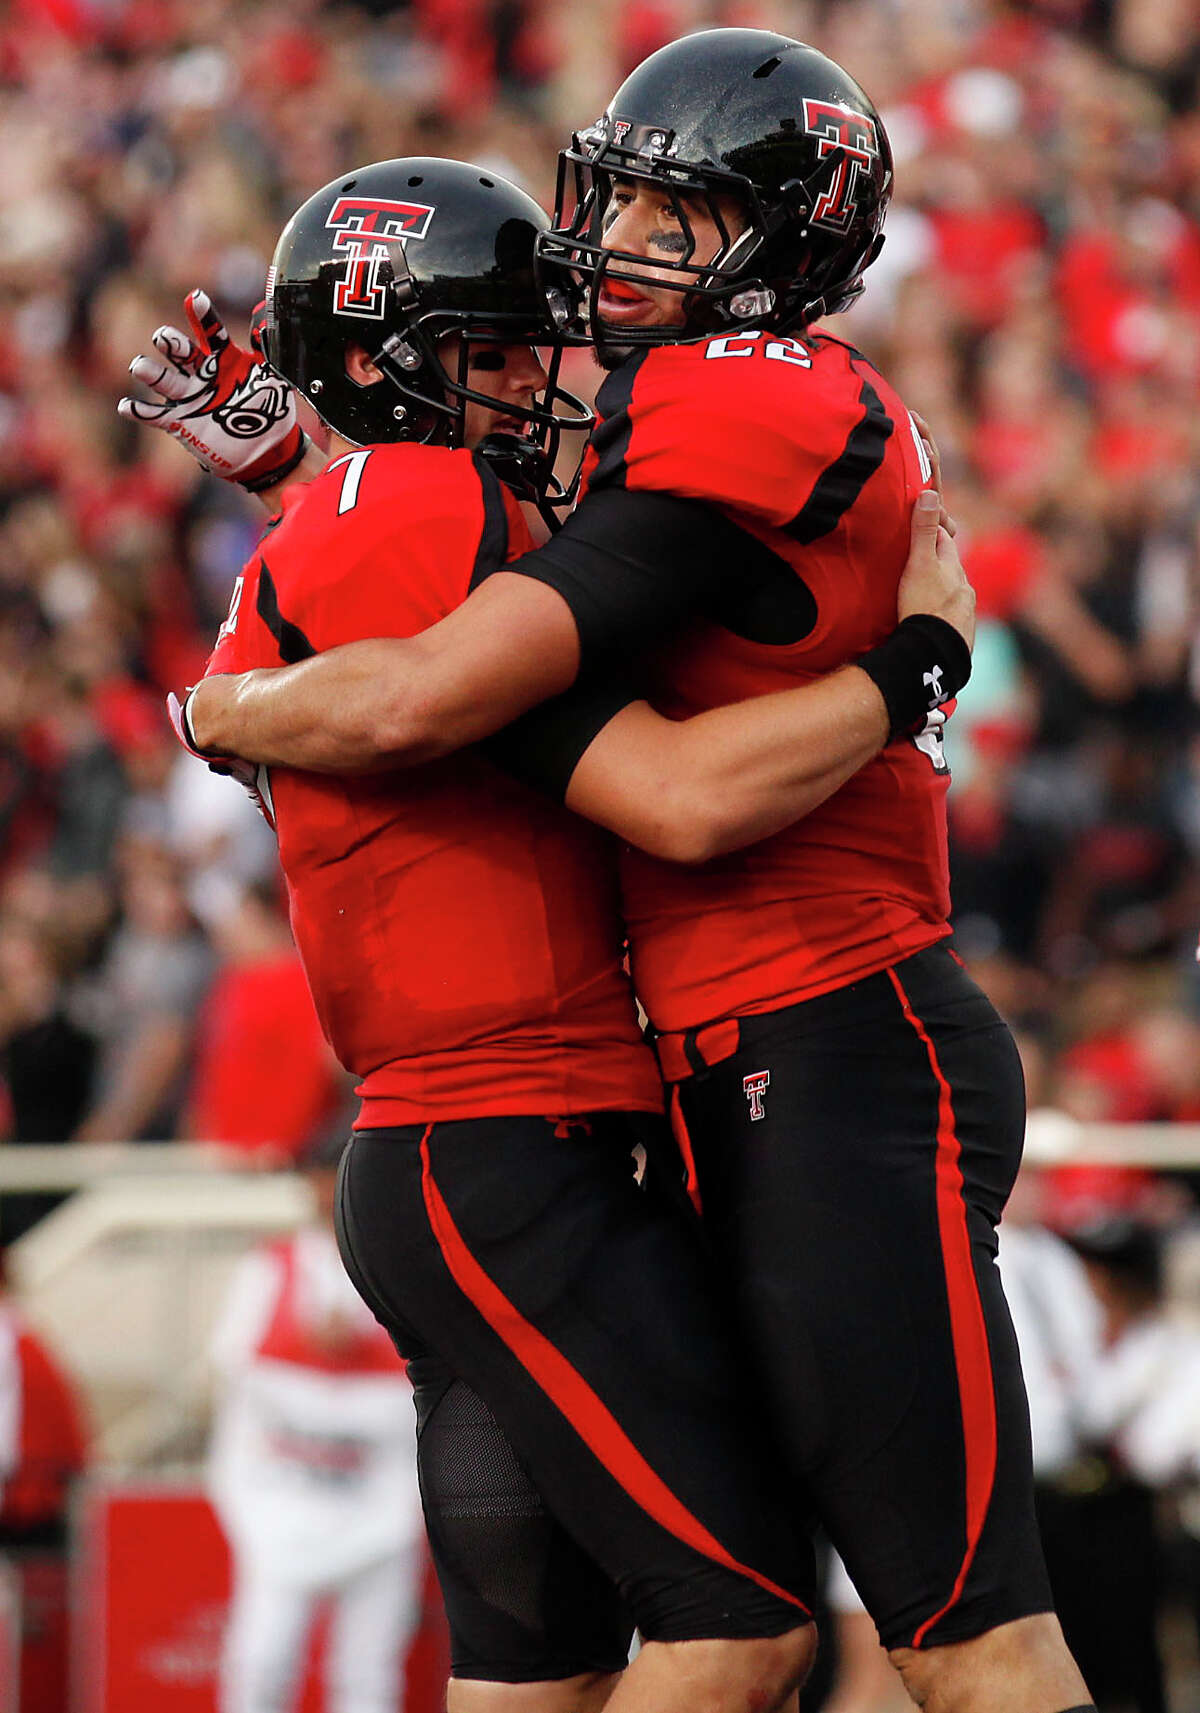 Texas Tech's Seth Doege (7) and Jace Amaro (22) celebrate a touchdown against New Mexico during an NCAA college football game in Lubbock, Texas, Saturday, Sept. 15, 2012. (AP Photo/Lubbock Avalanche-Journal, Stephen Spillman) Texas Tech